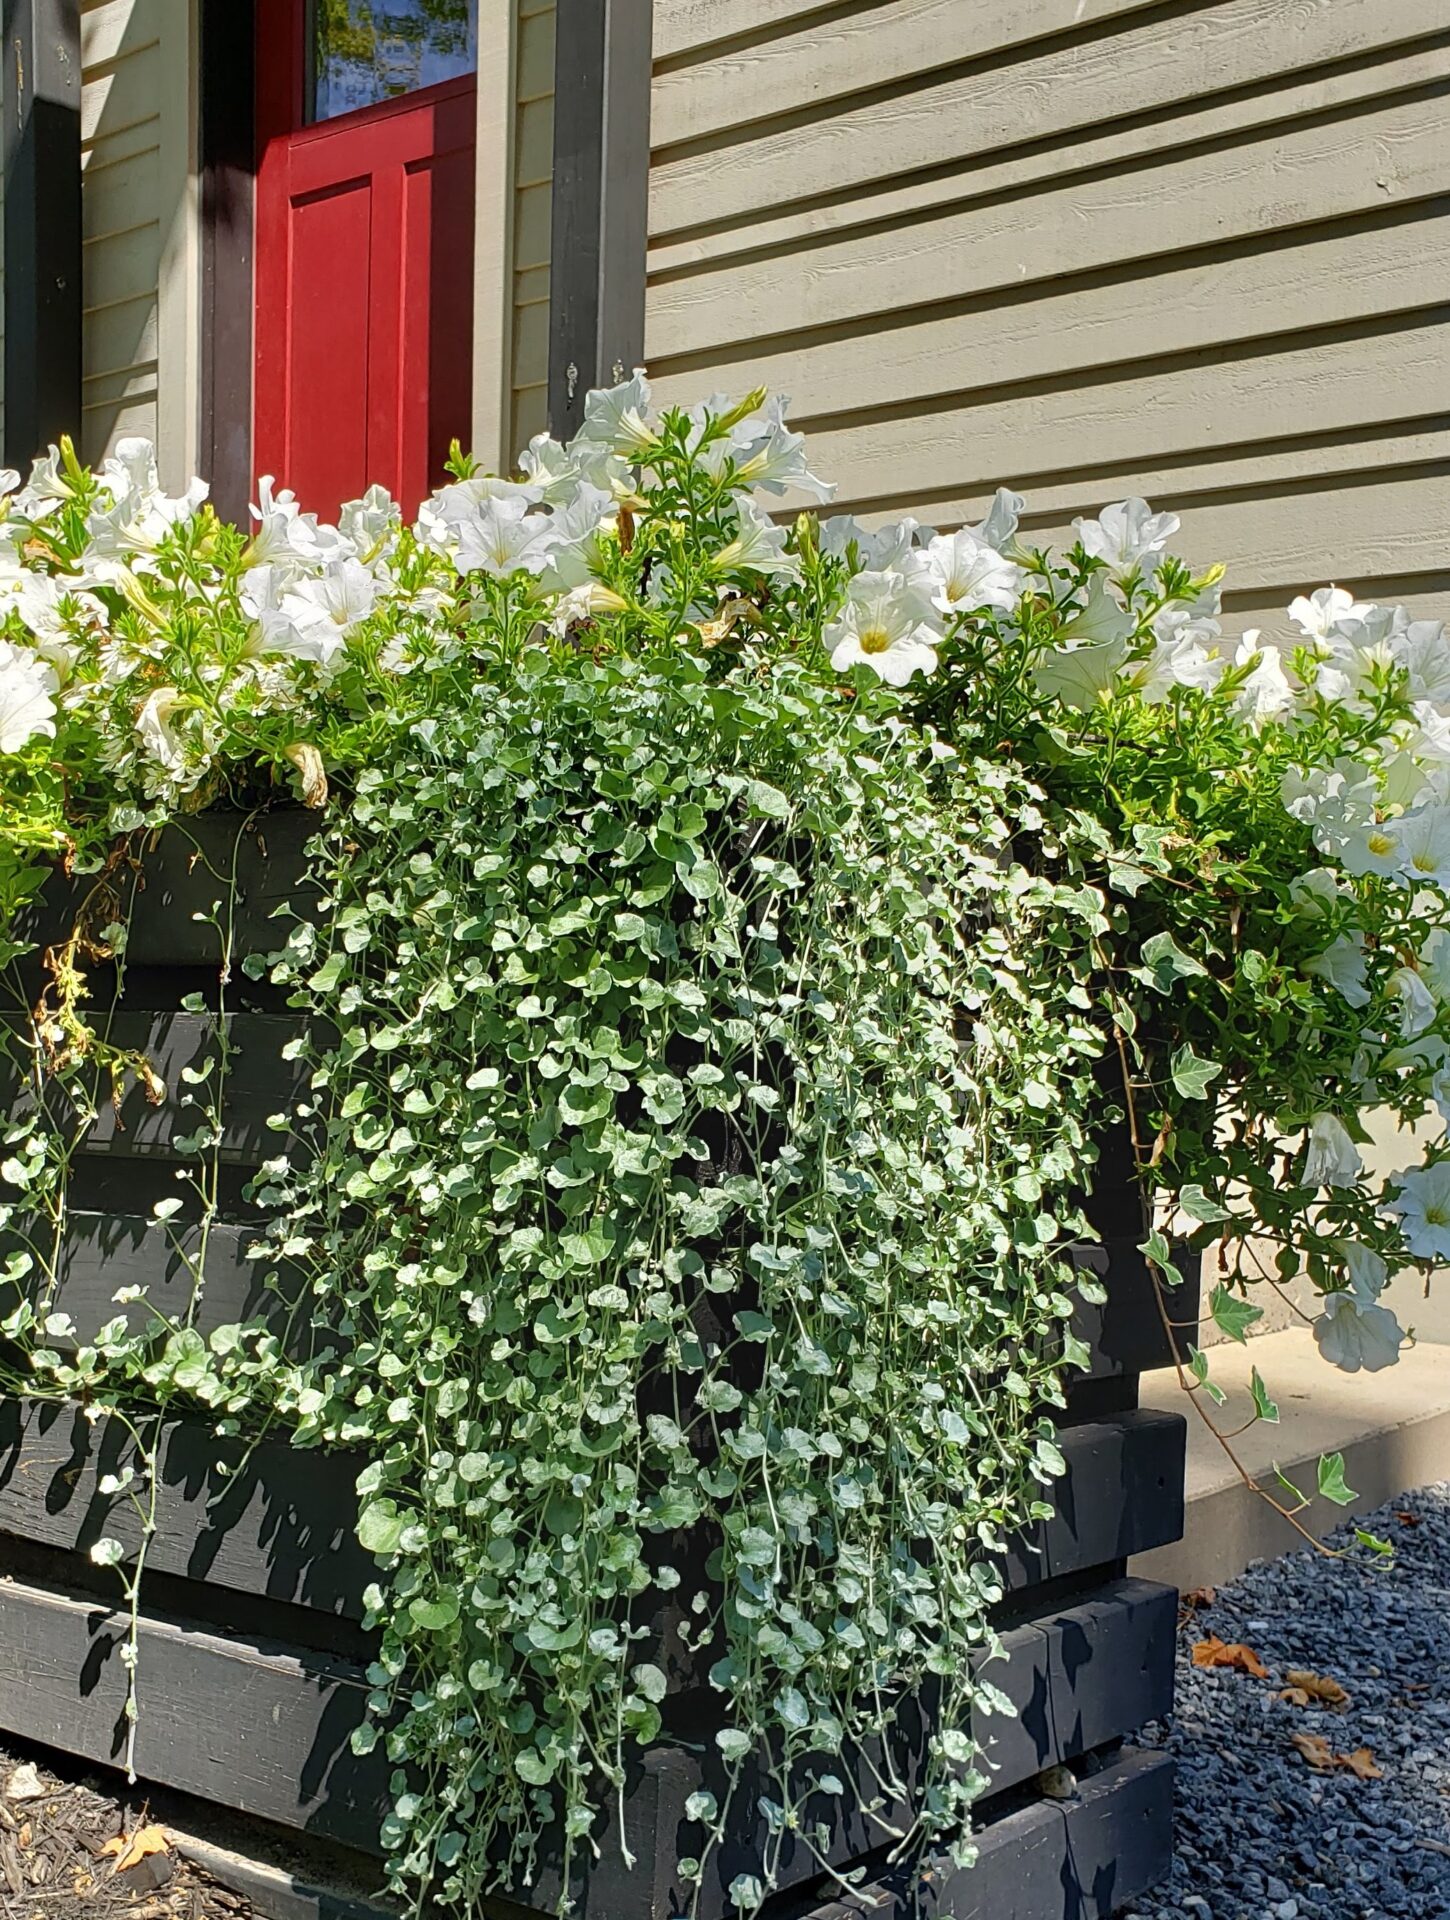 A lush window box overflows with white flowers and trailing greenery against a house with beige siding and a red door.